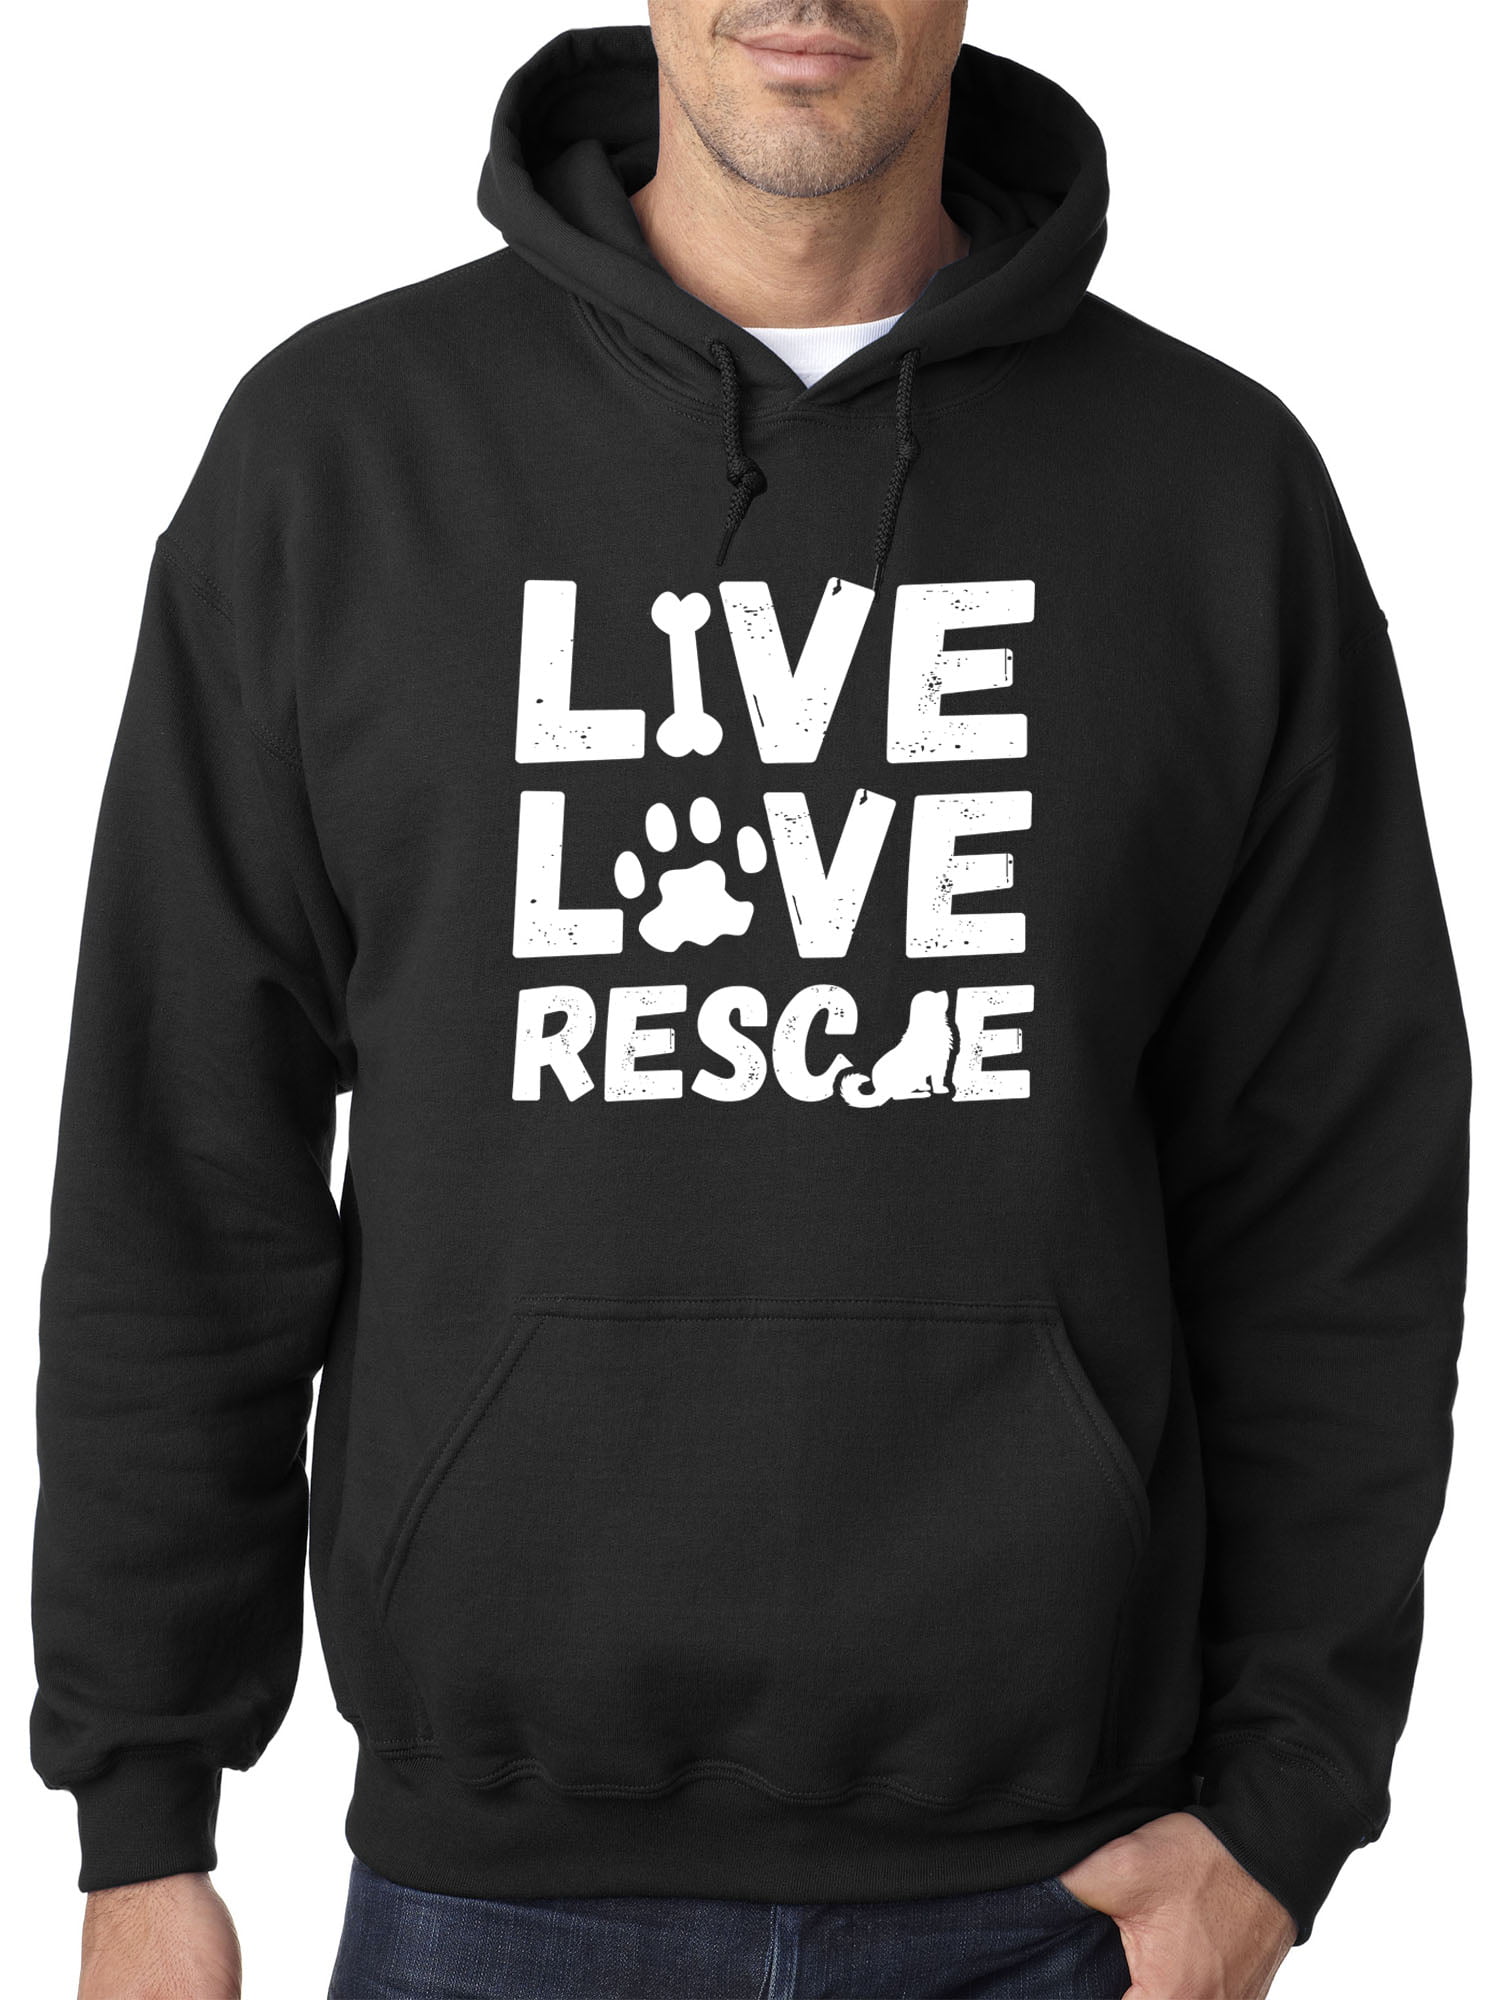 I Love My Shelter Dog HOODIE Sweatshirt Sweater Hooded Rescue Puppy Adopt Pet 